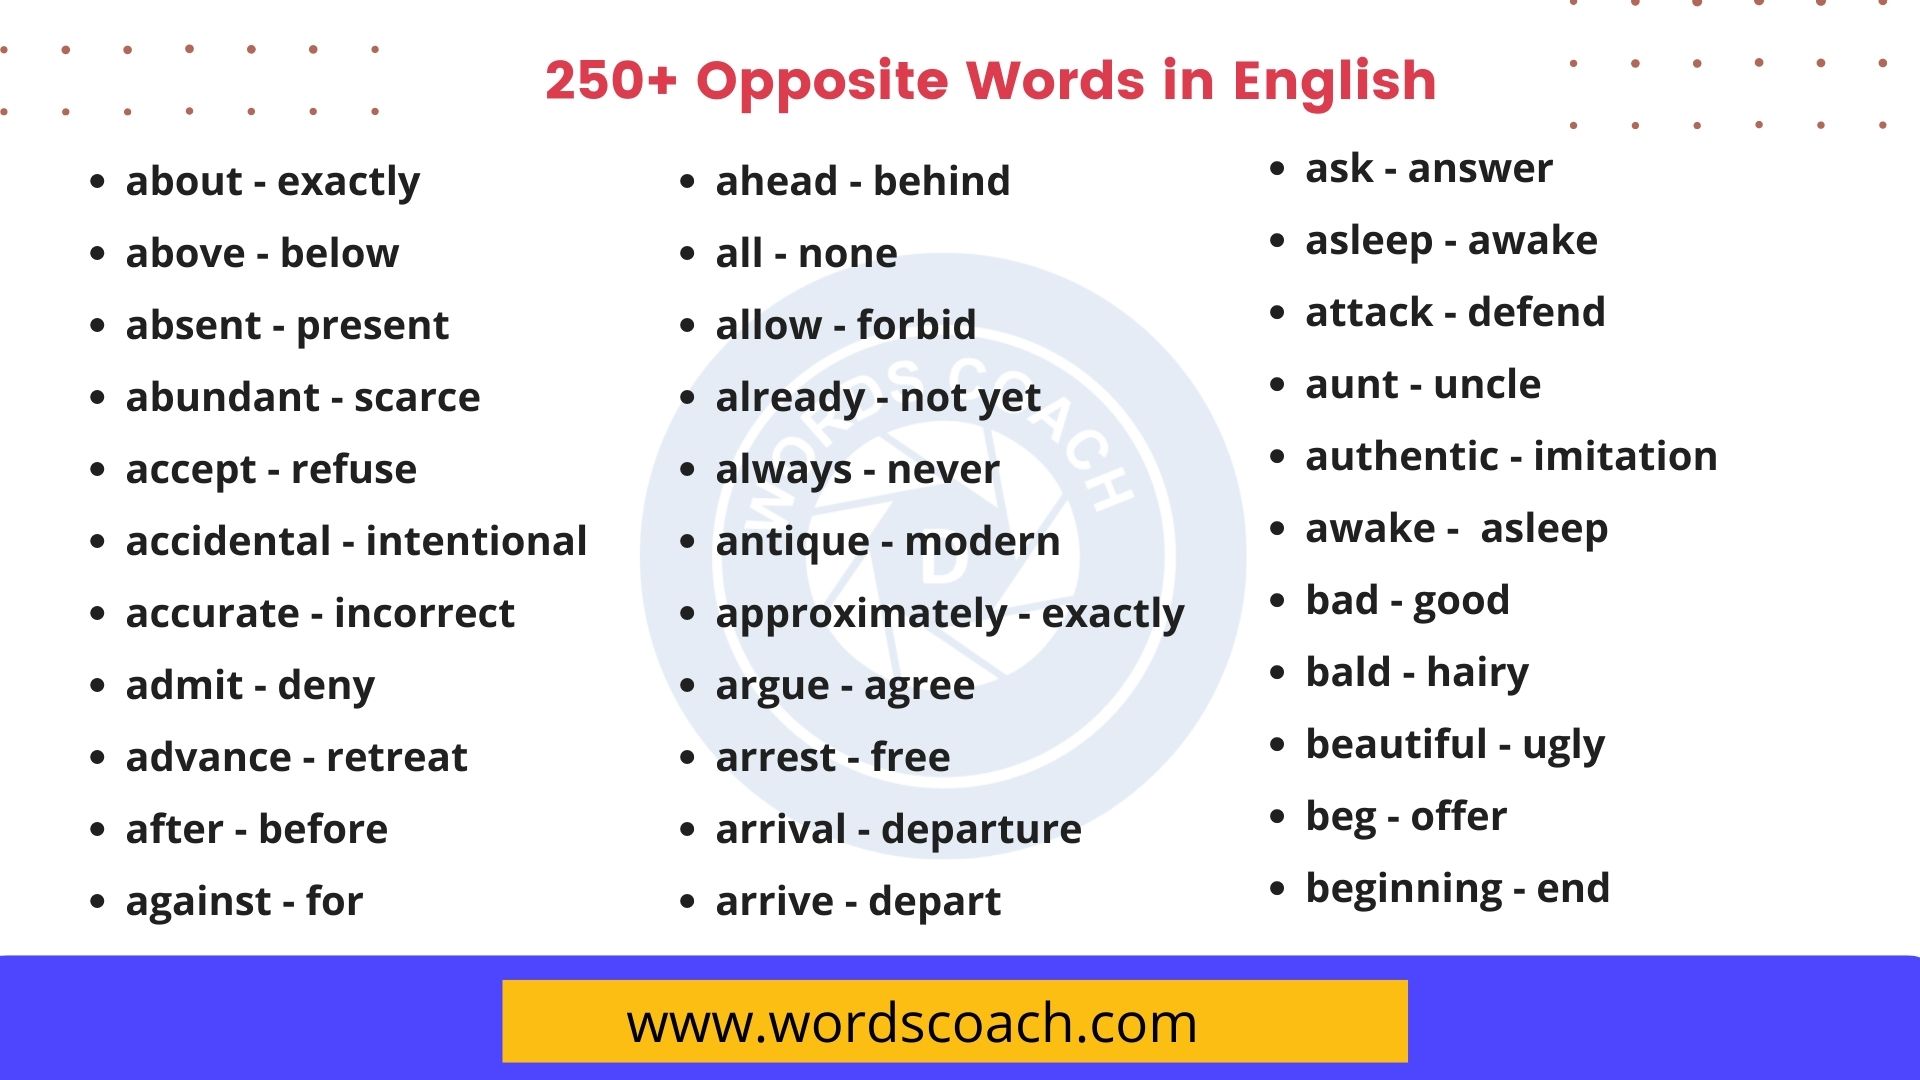 250+ Opposite Words in English